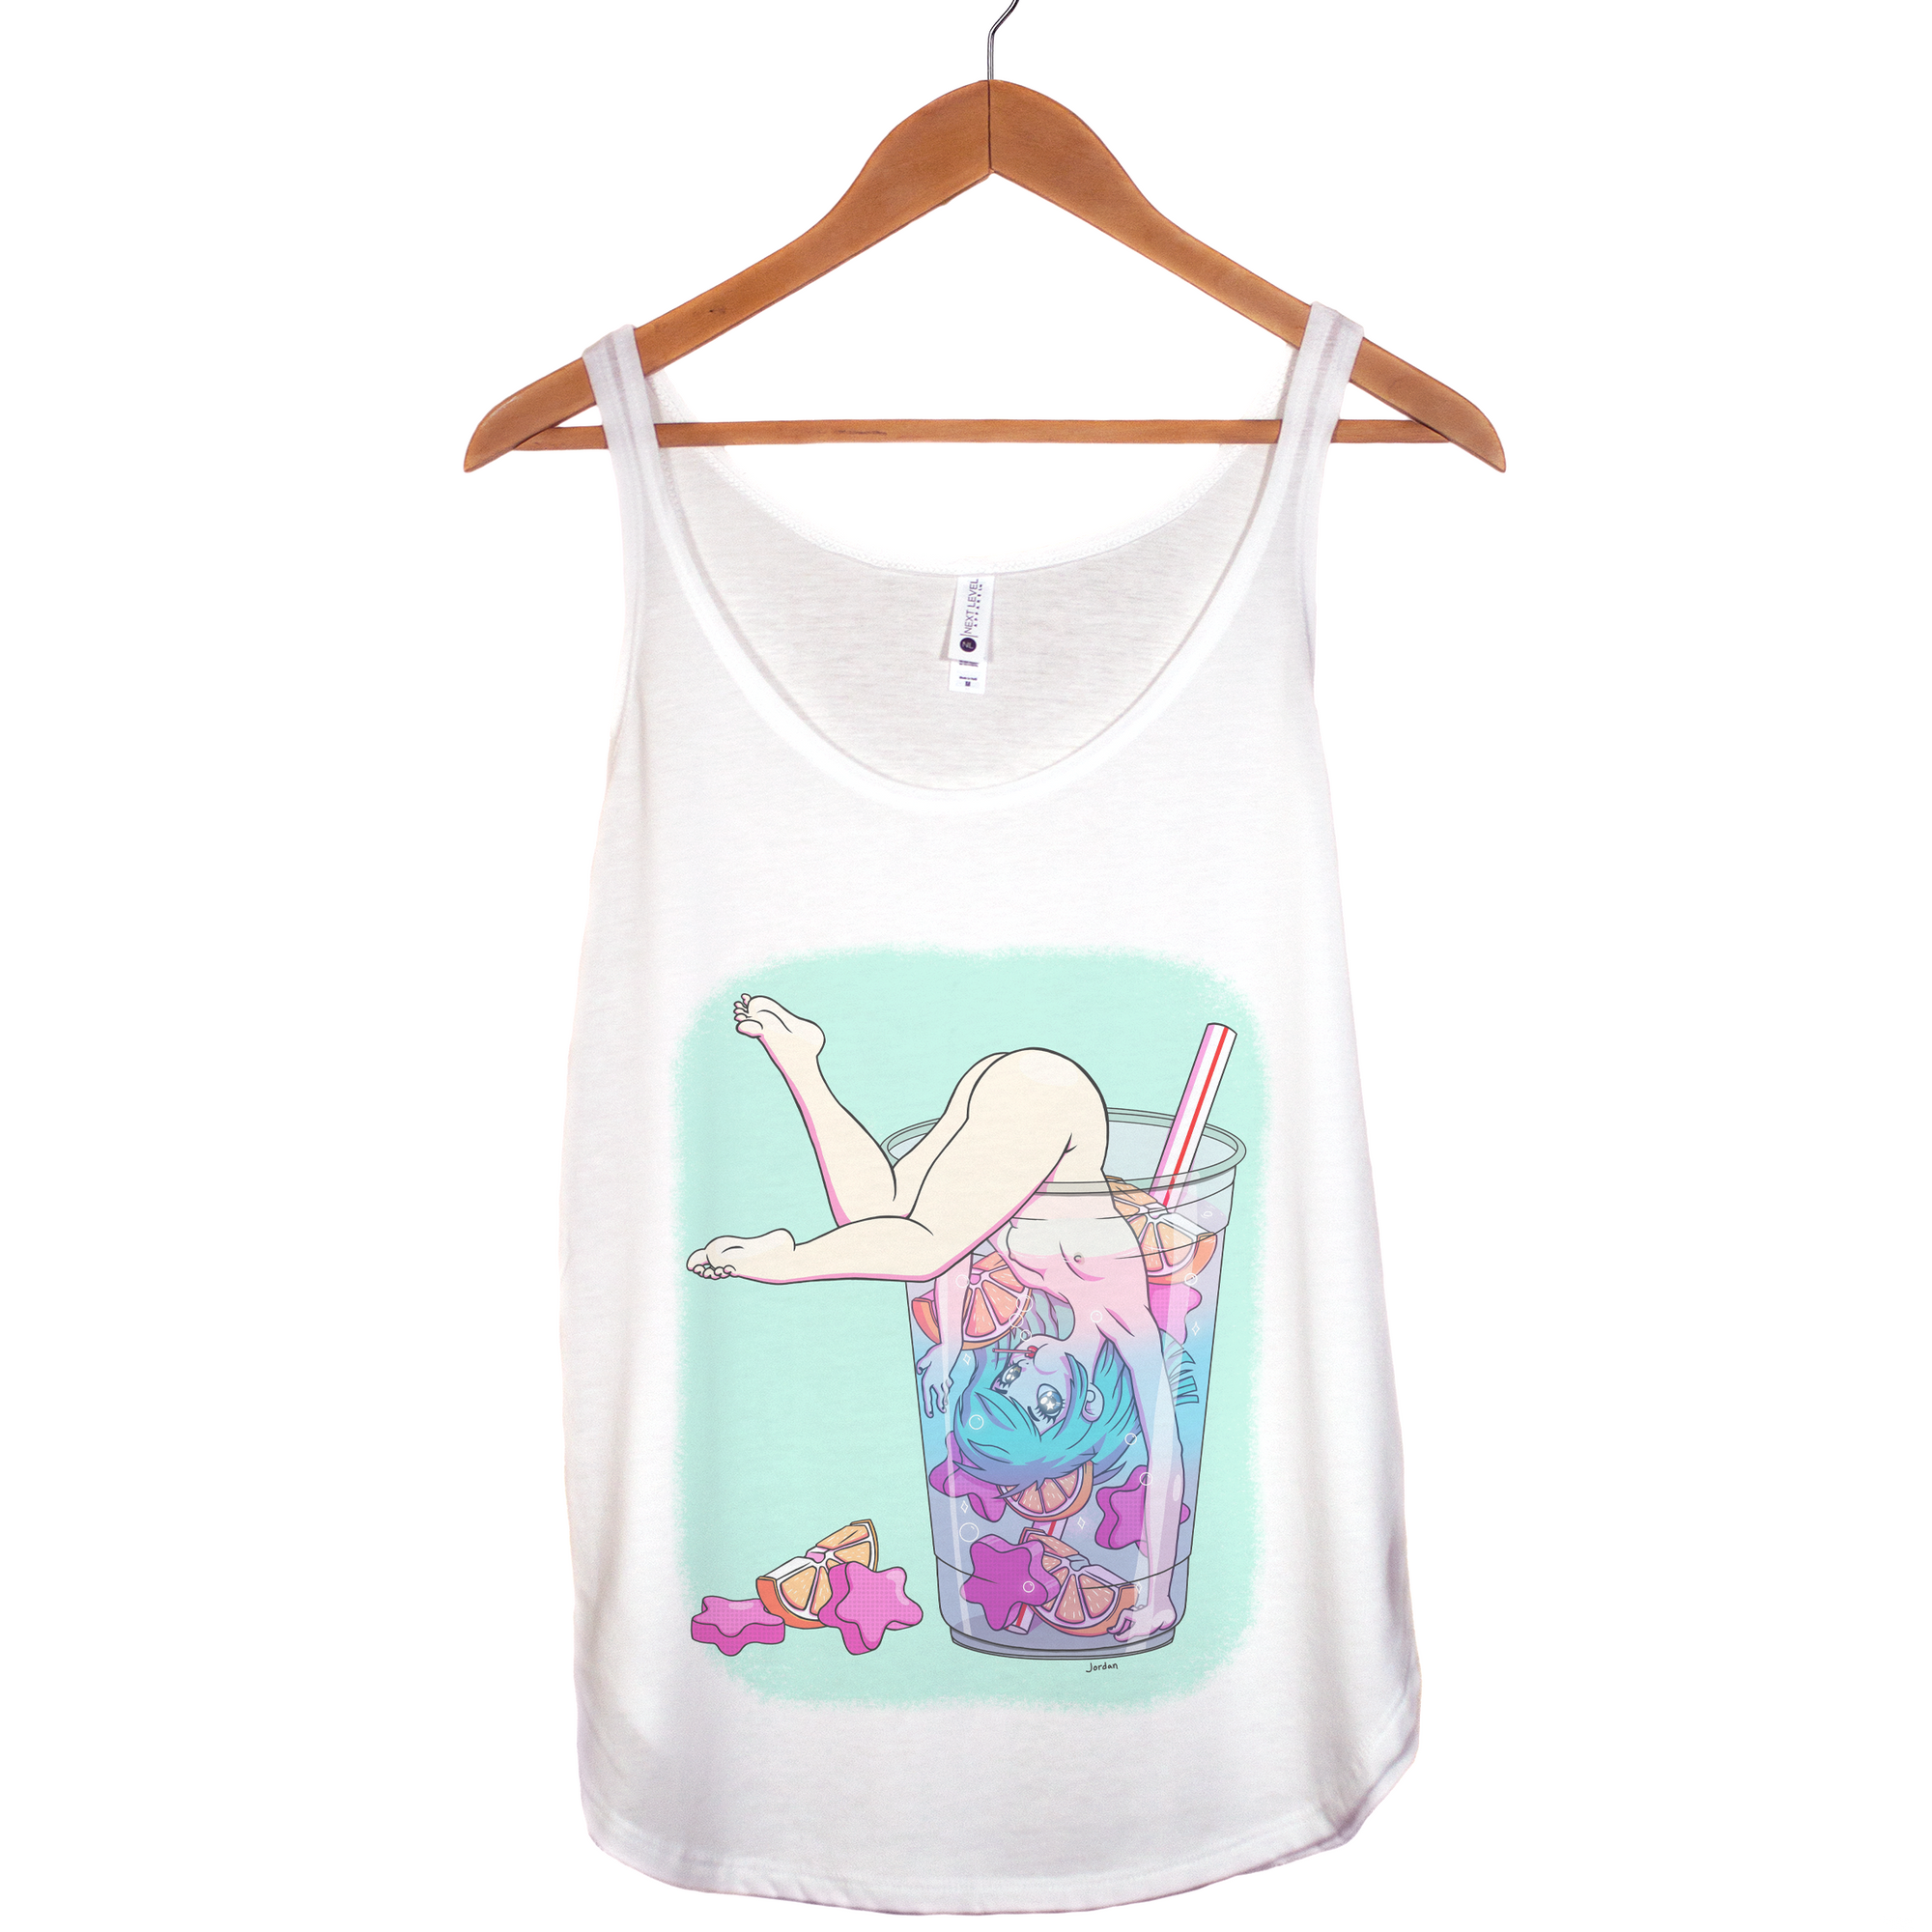 "Skinny Sipping" - Triblend Tank